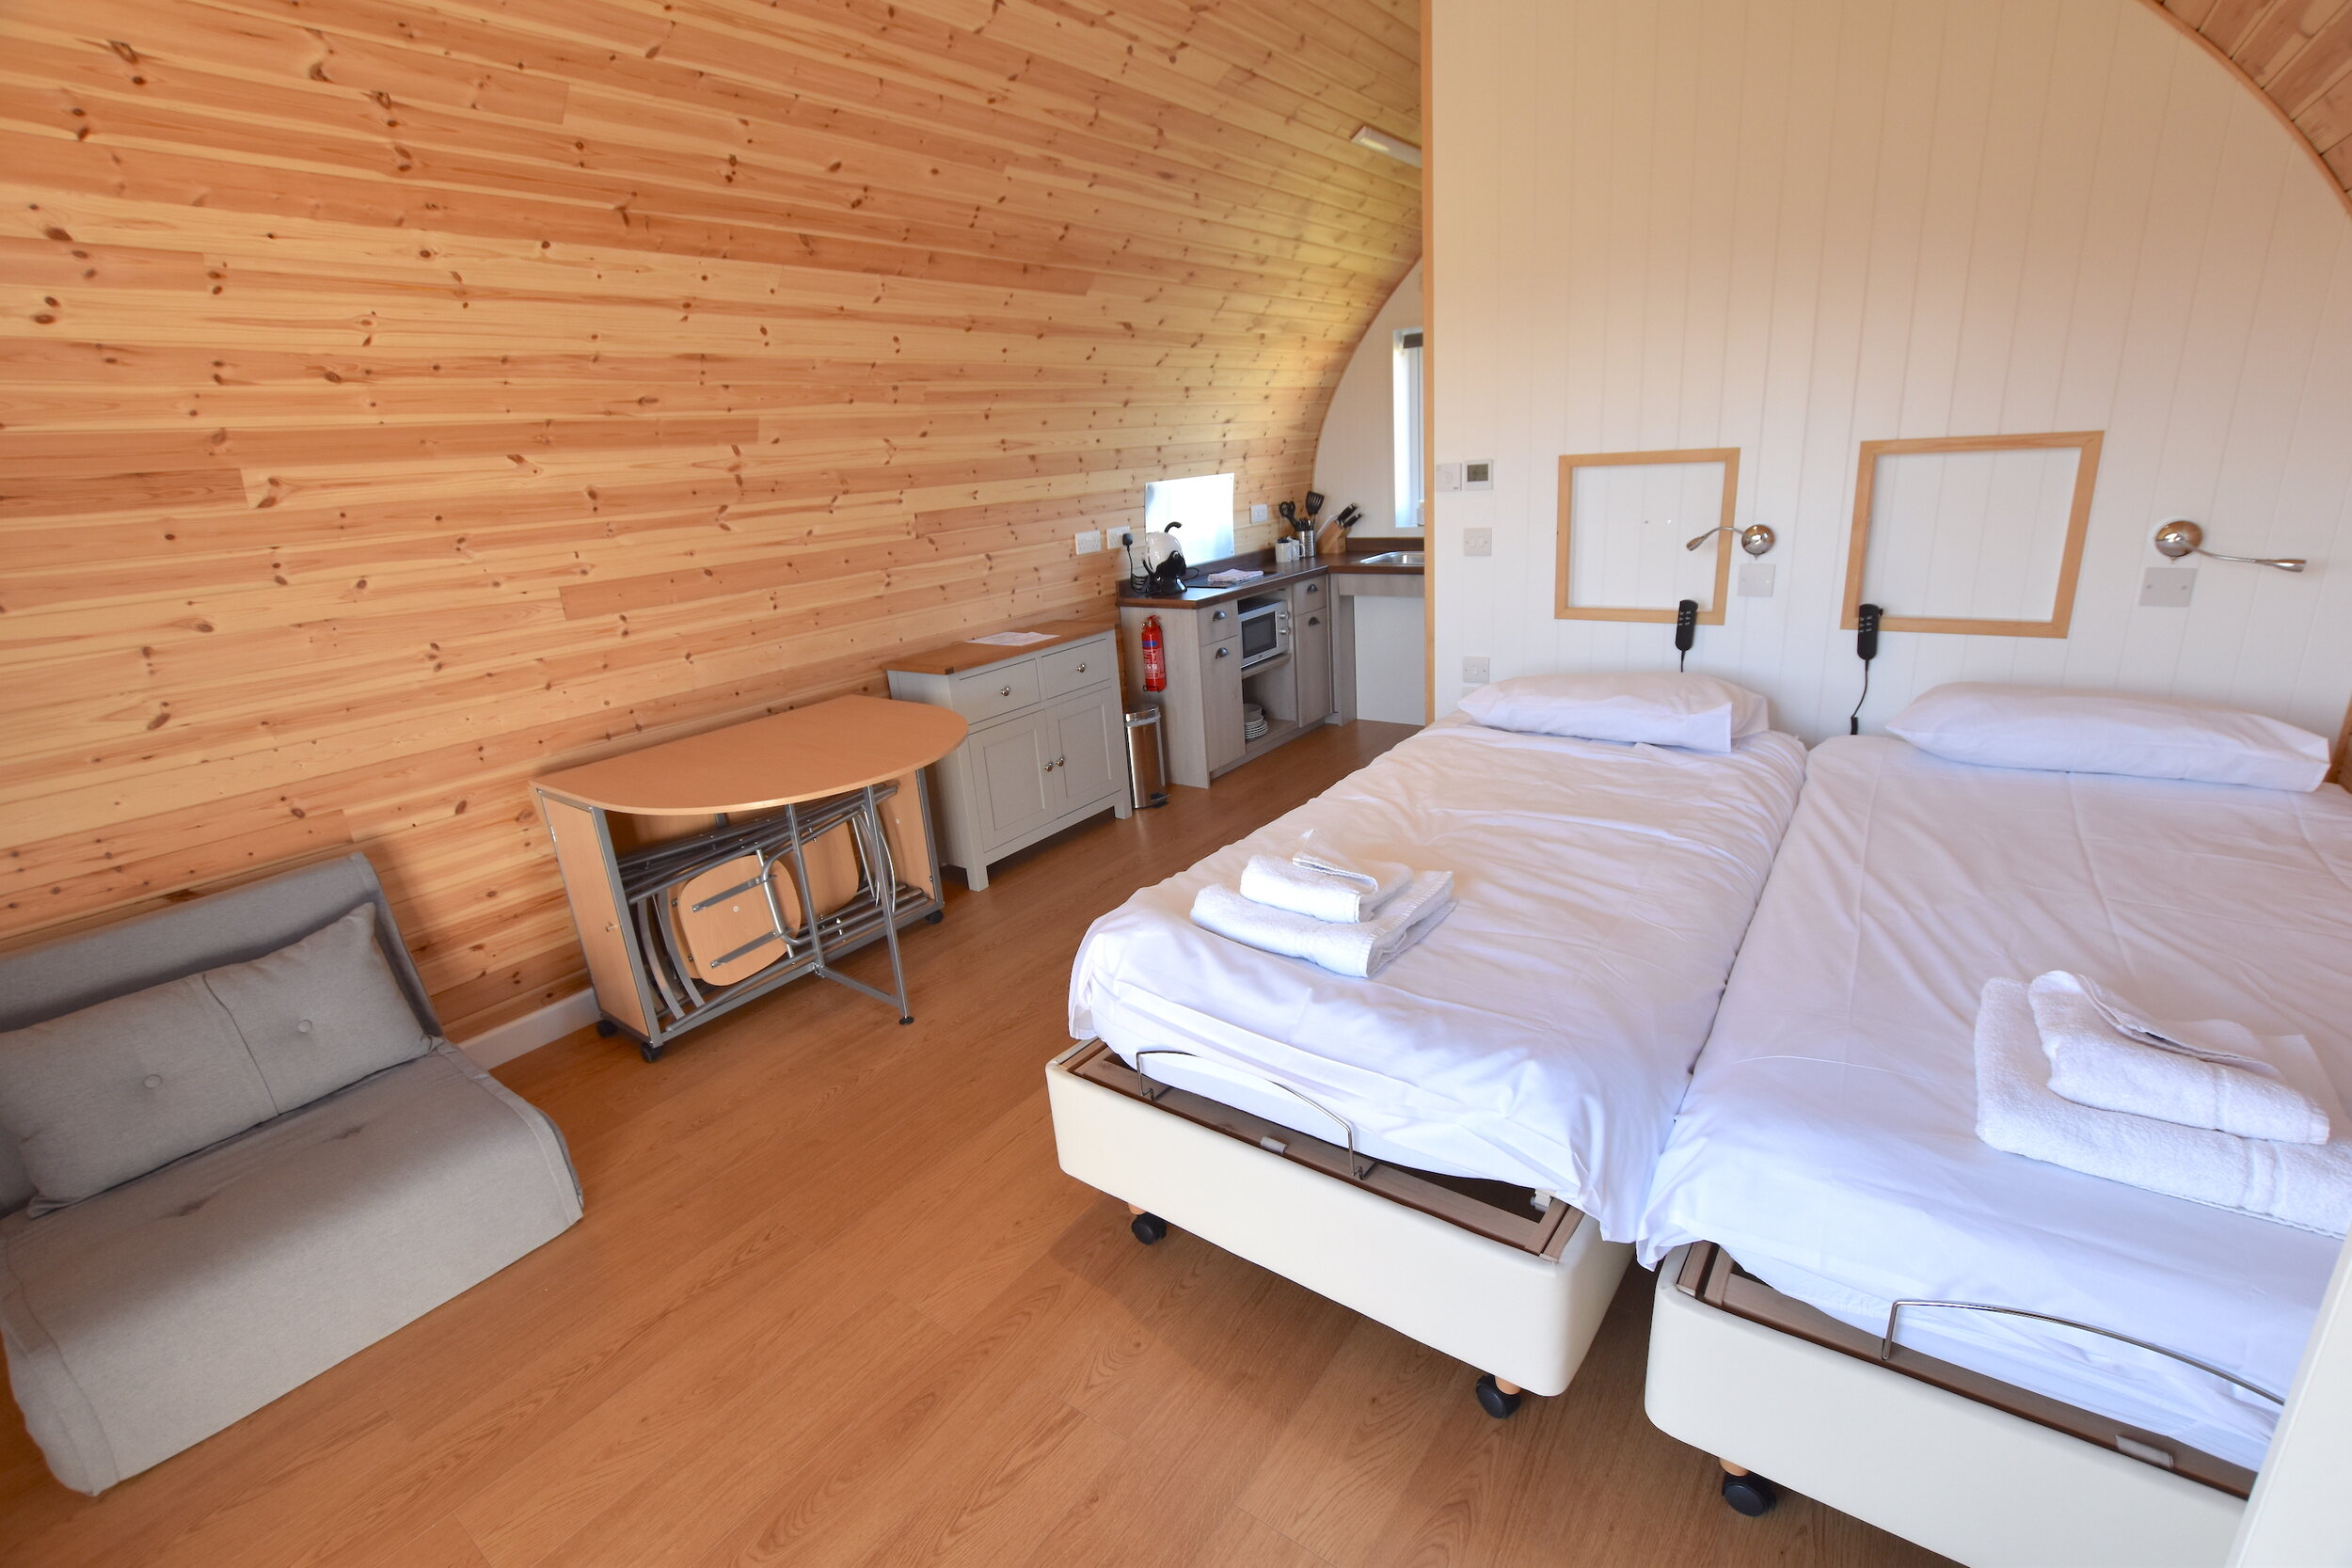 Wheelchair accessible glamping pod living space